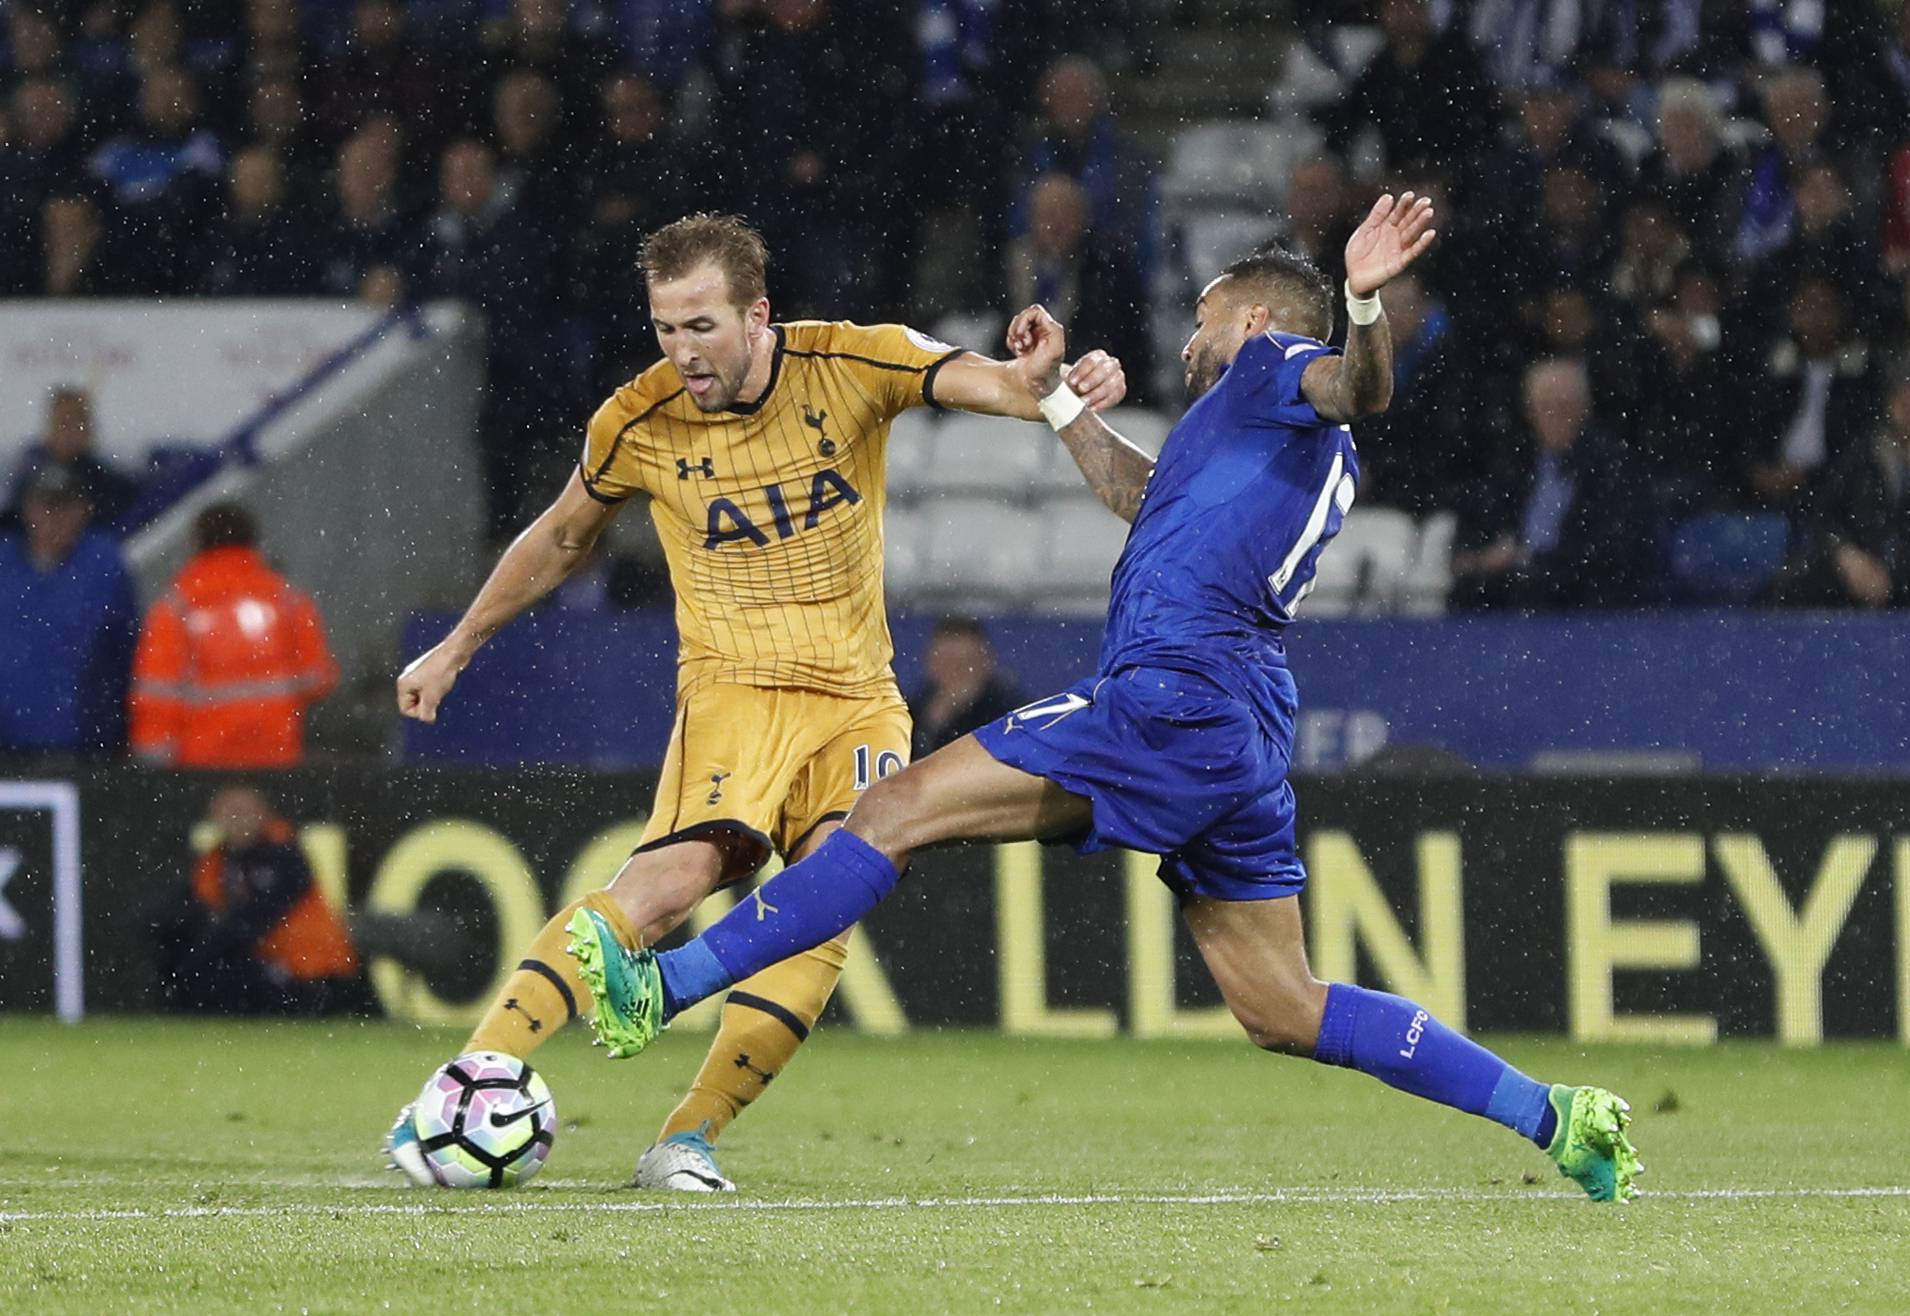 Tottenham's Harry Kane scores their fifth goal to complete his hat trick